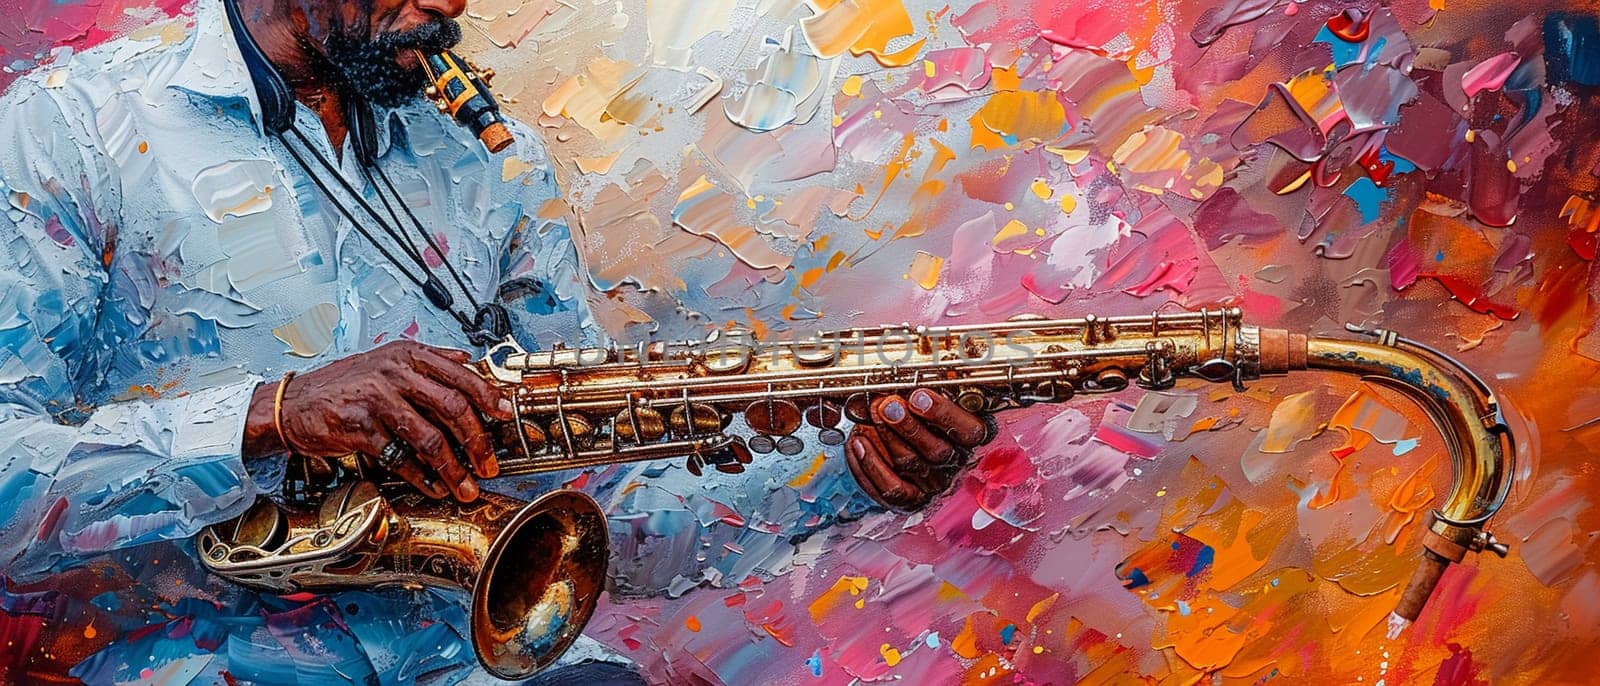 Jazz musician's hands on a saxophone, painted with soulful brushstrokes and deep, resonant colors.